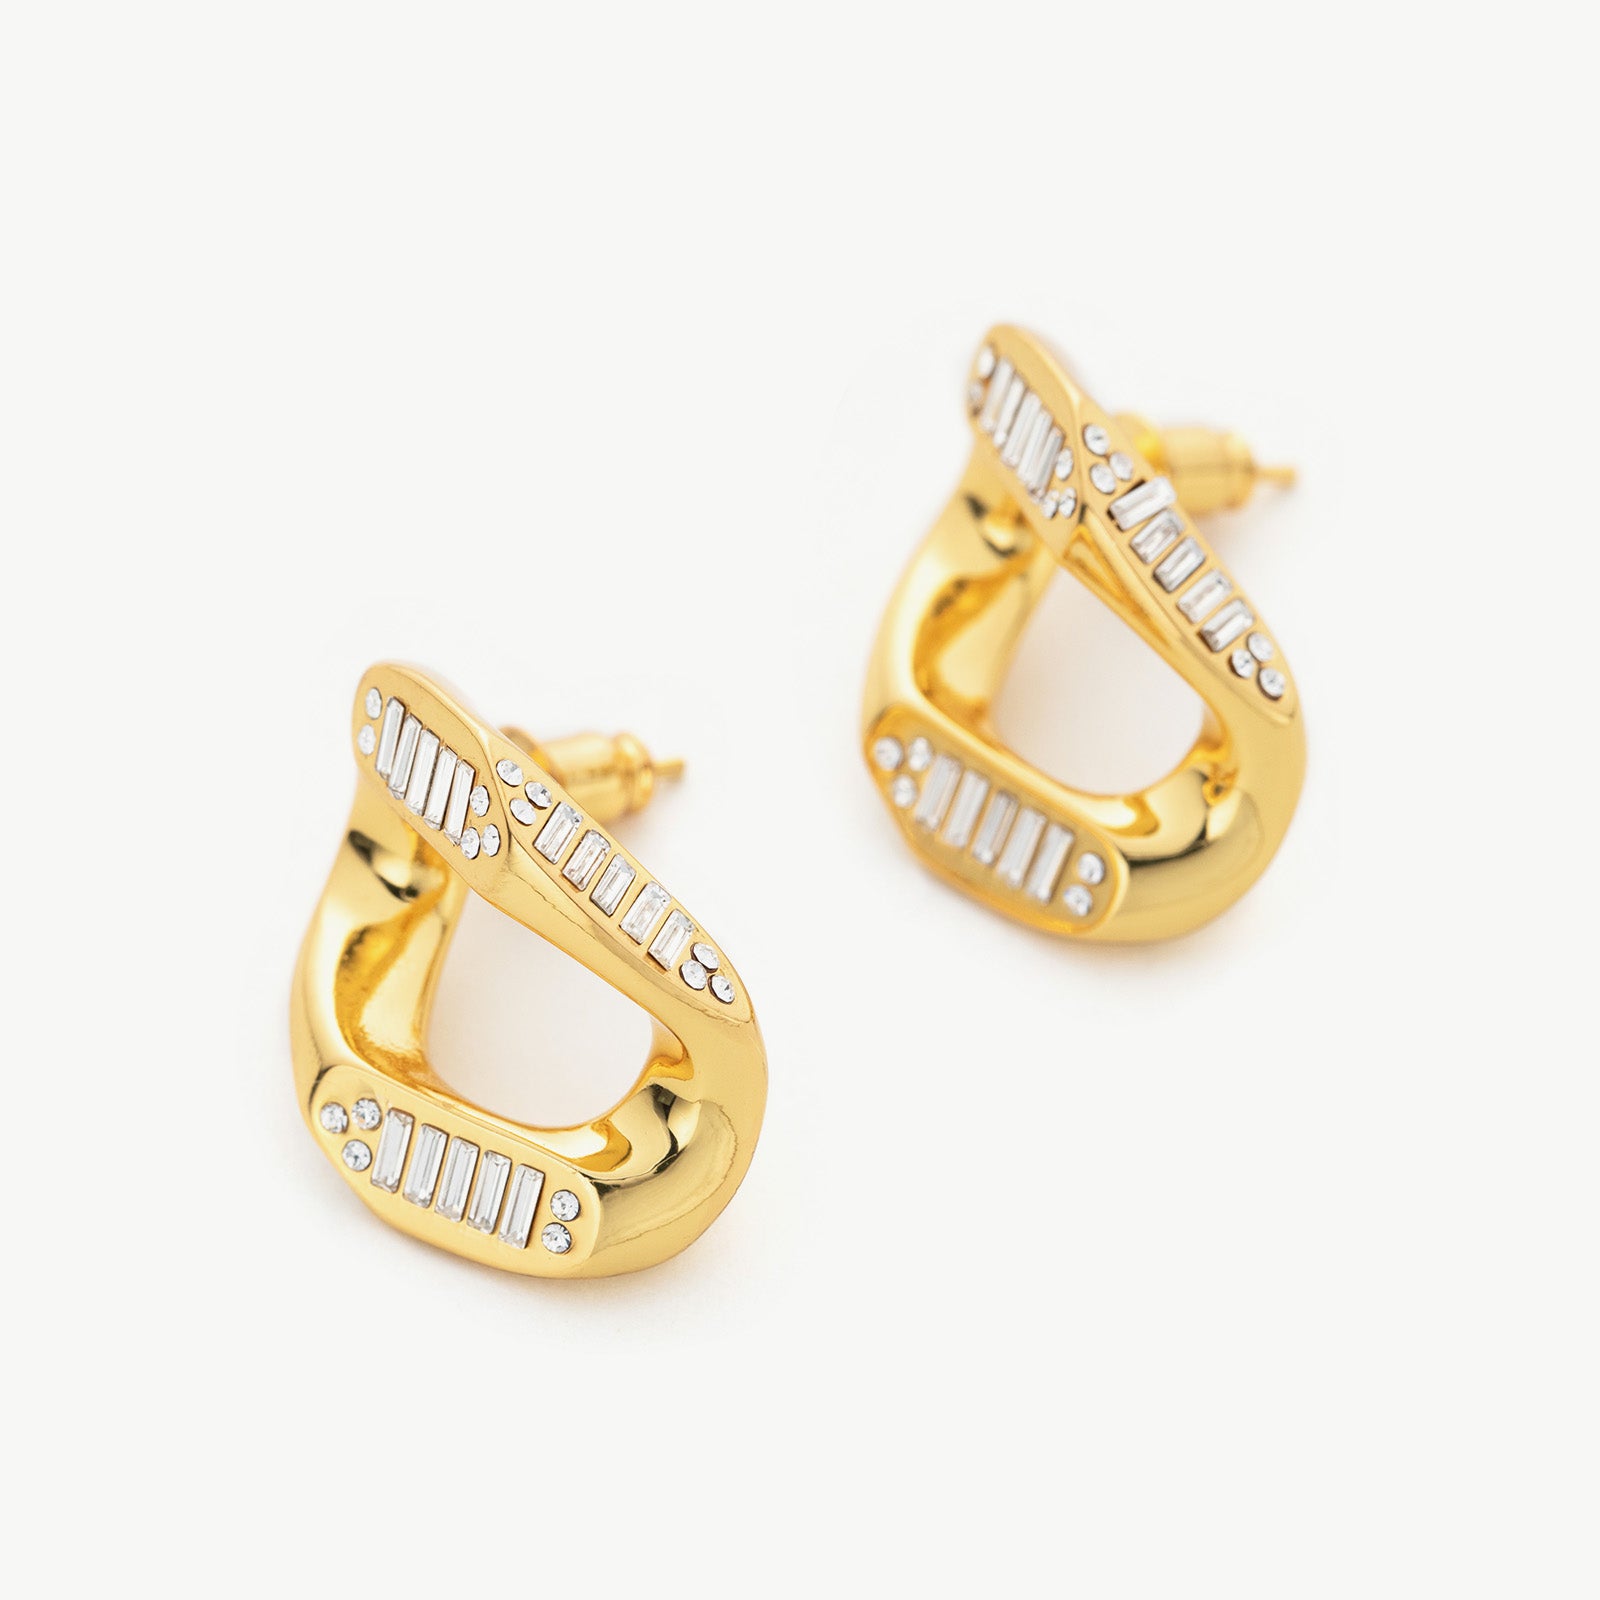 Gold Crystal Wavy Stud Earrings, a stylish and sunlit accessory that captures the essence of elegance and warmth.